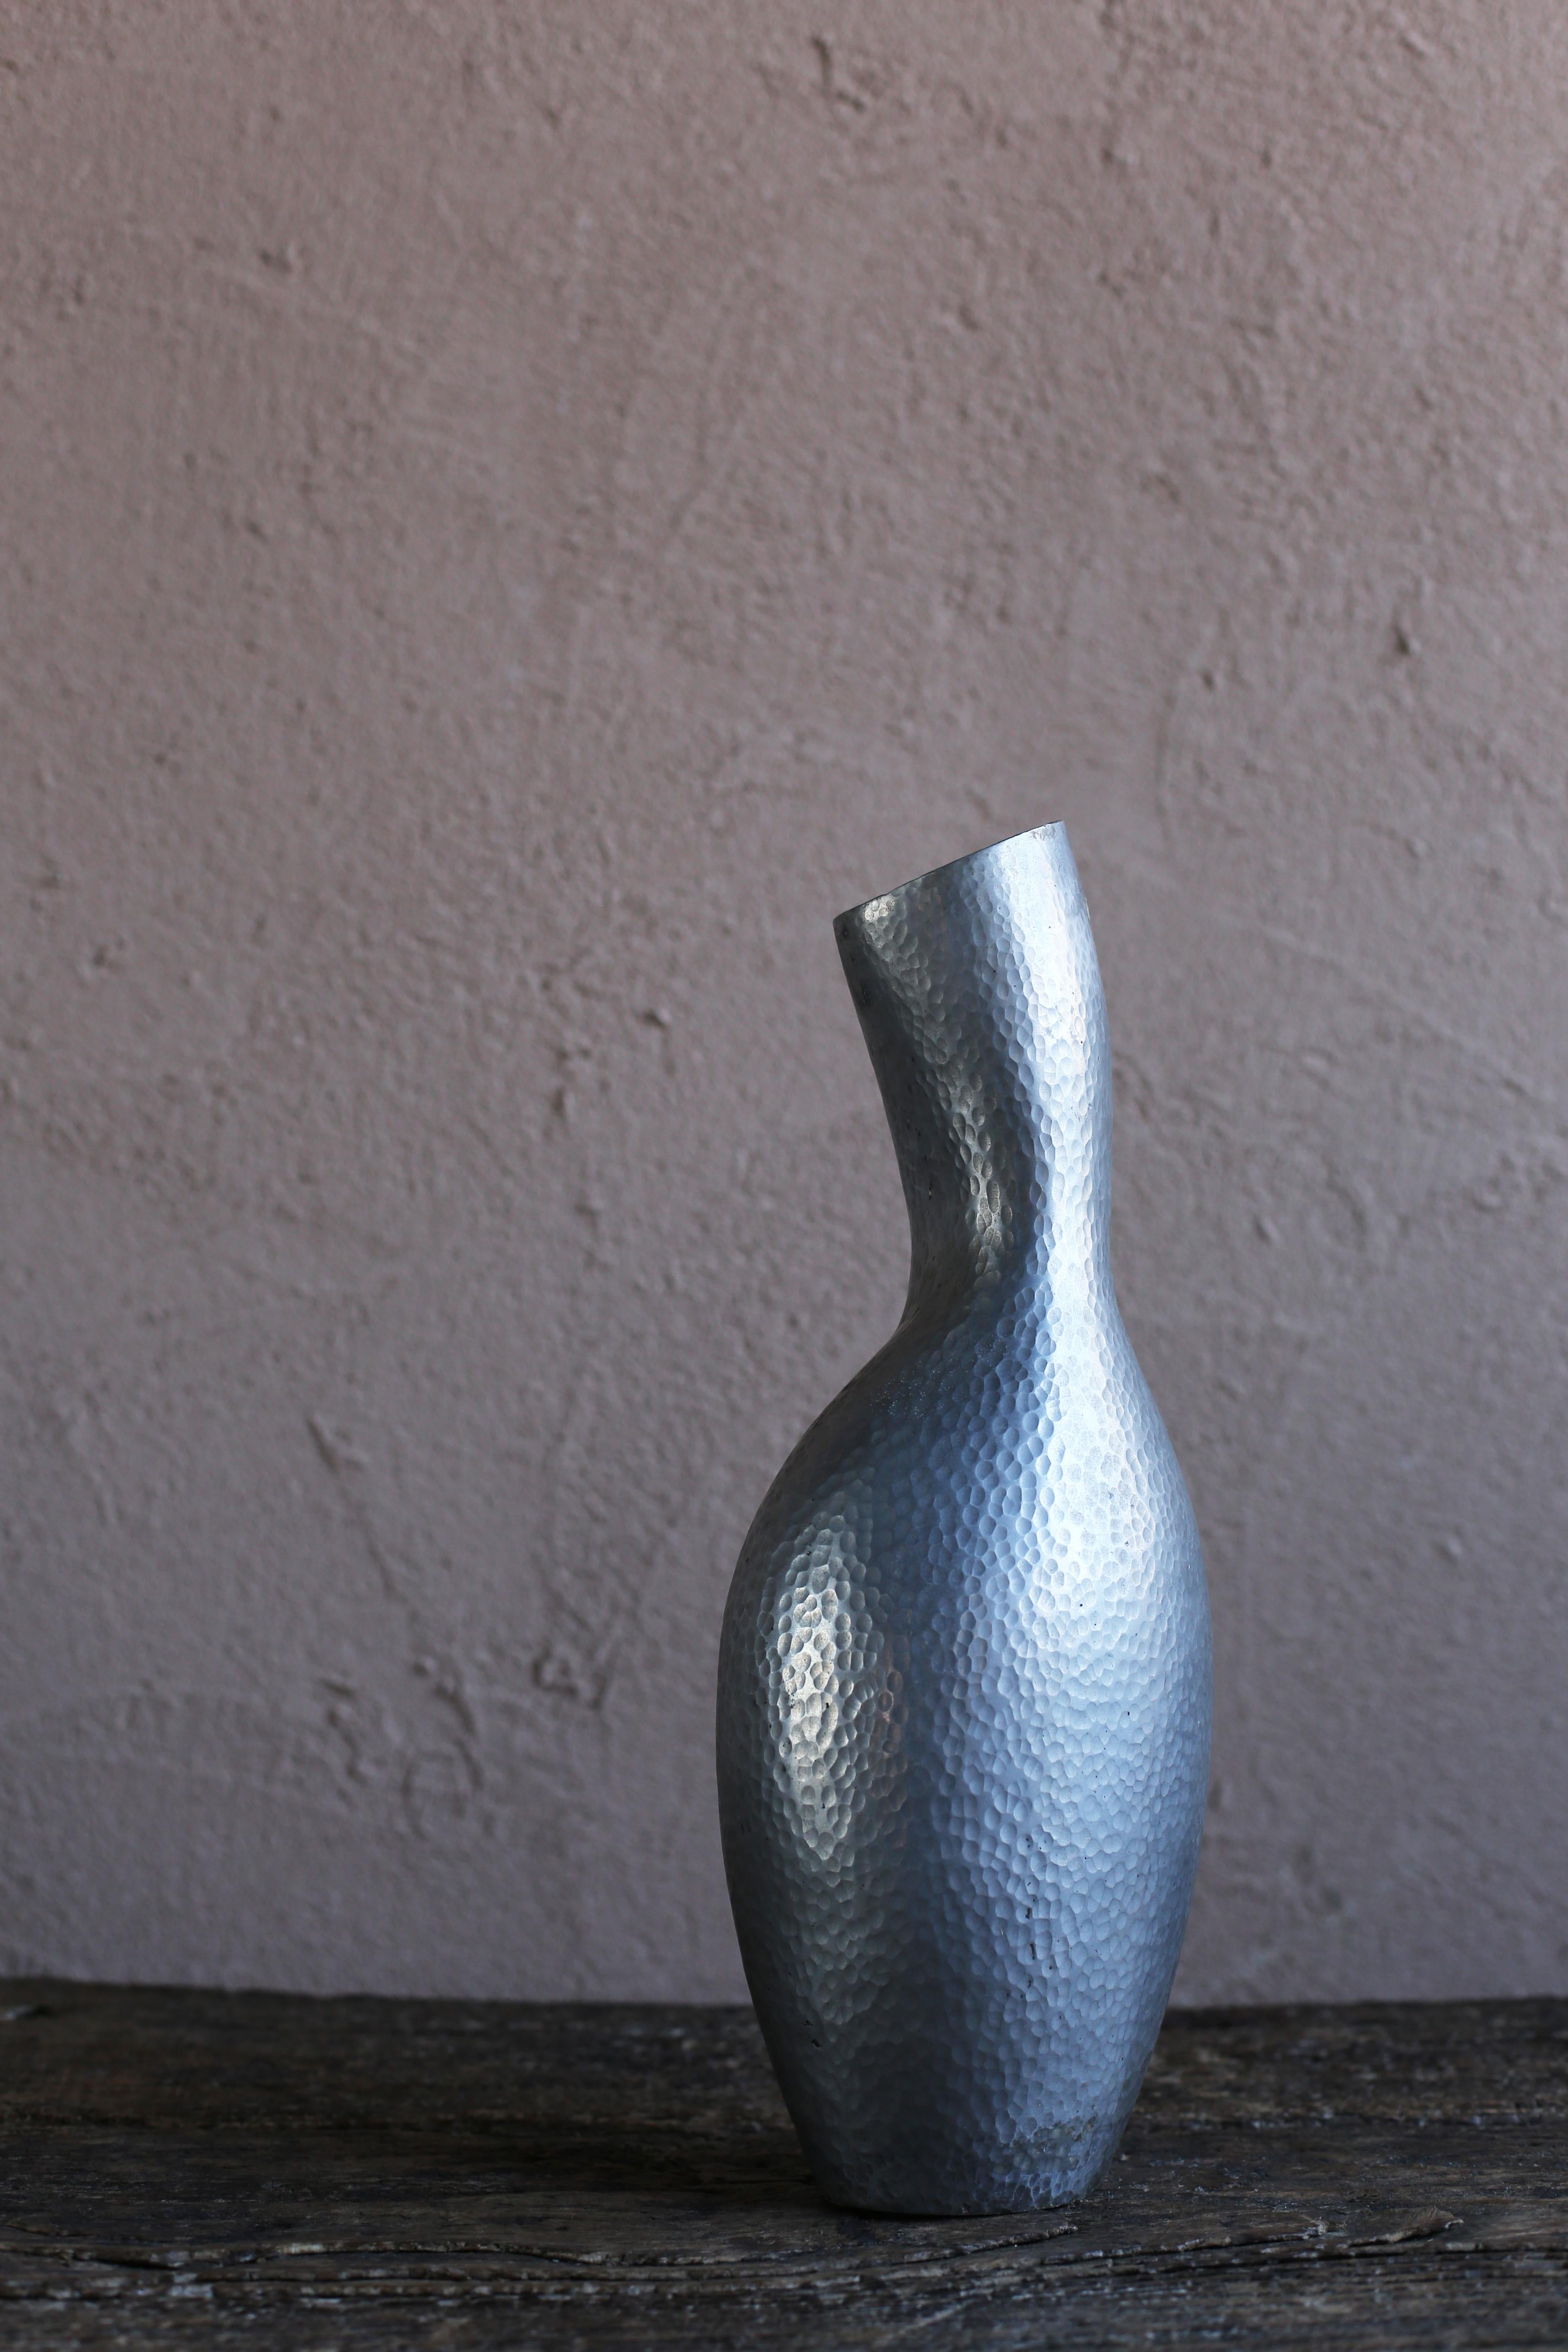 A vintage vase by a Moroccan artist. The artist is unknown. Made of cast aluminum with a unique shape. The texture of the texture that seems to be finely tapped is also interesting.